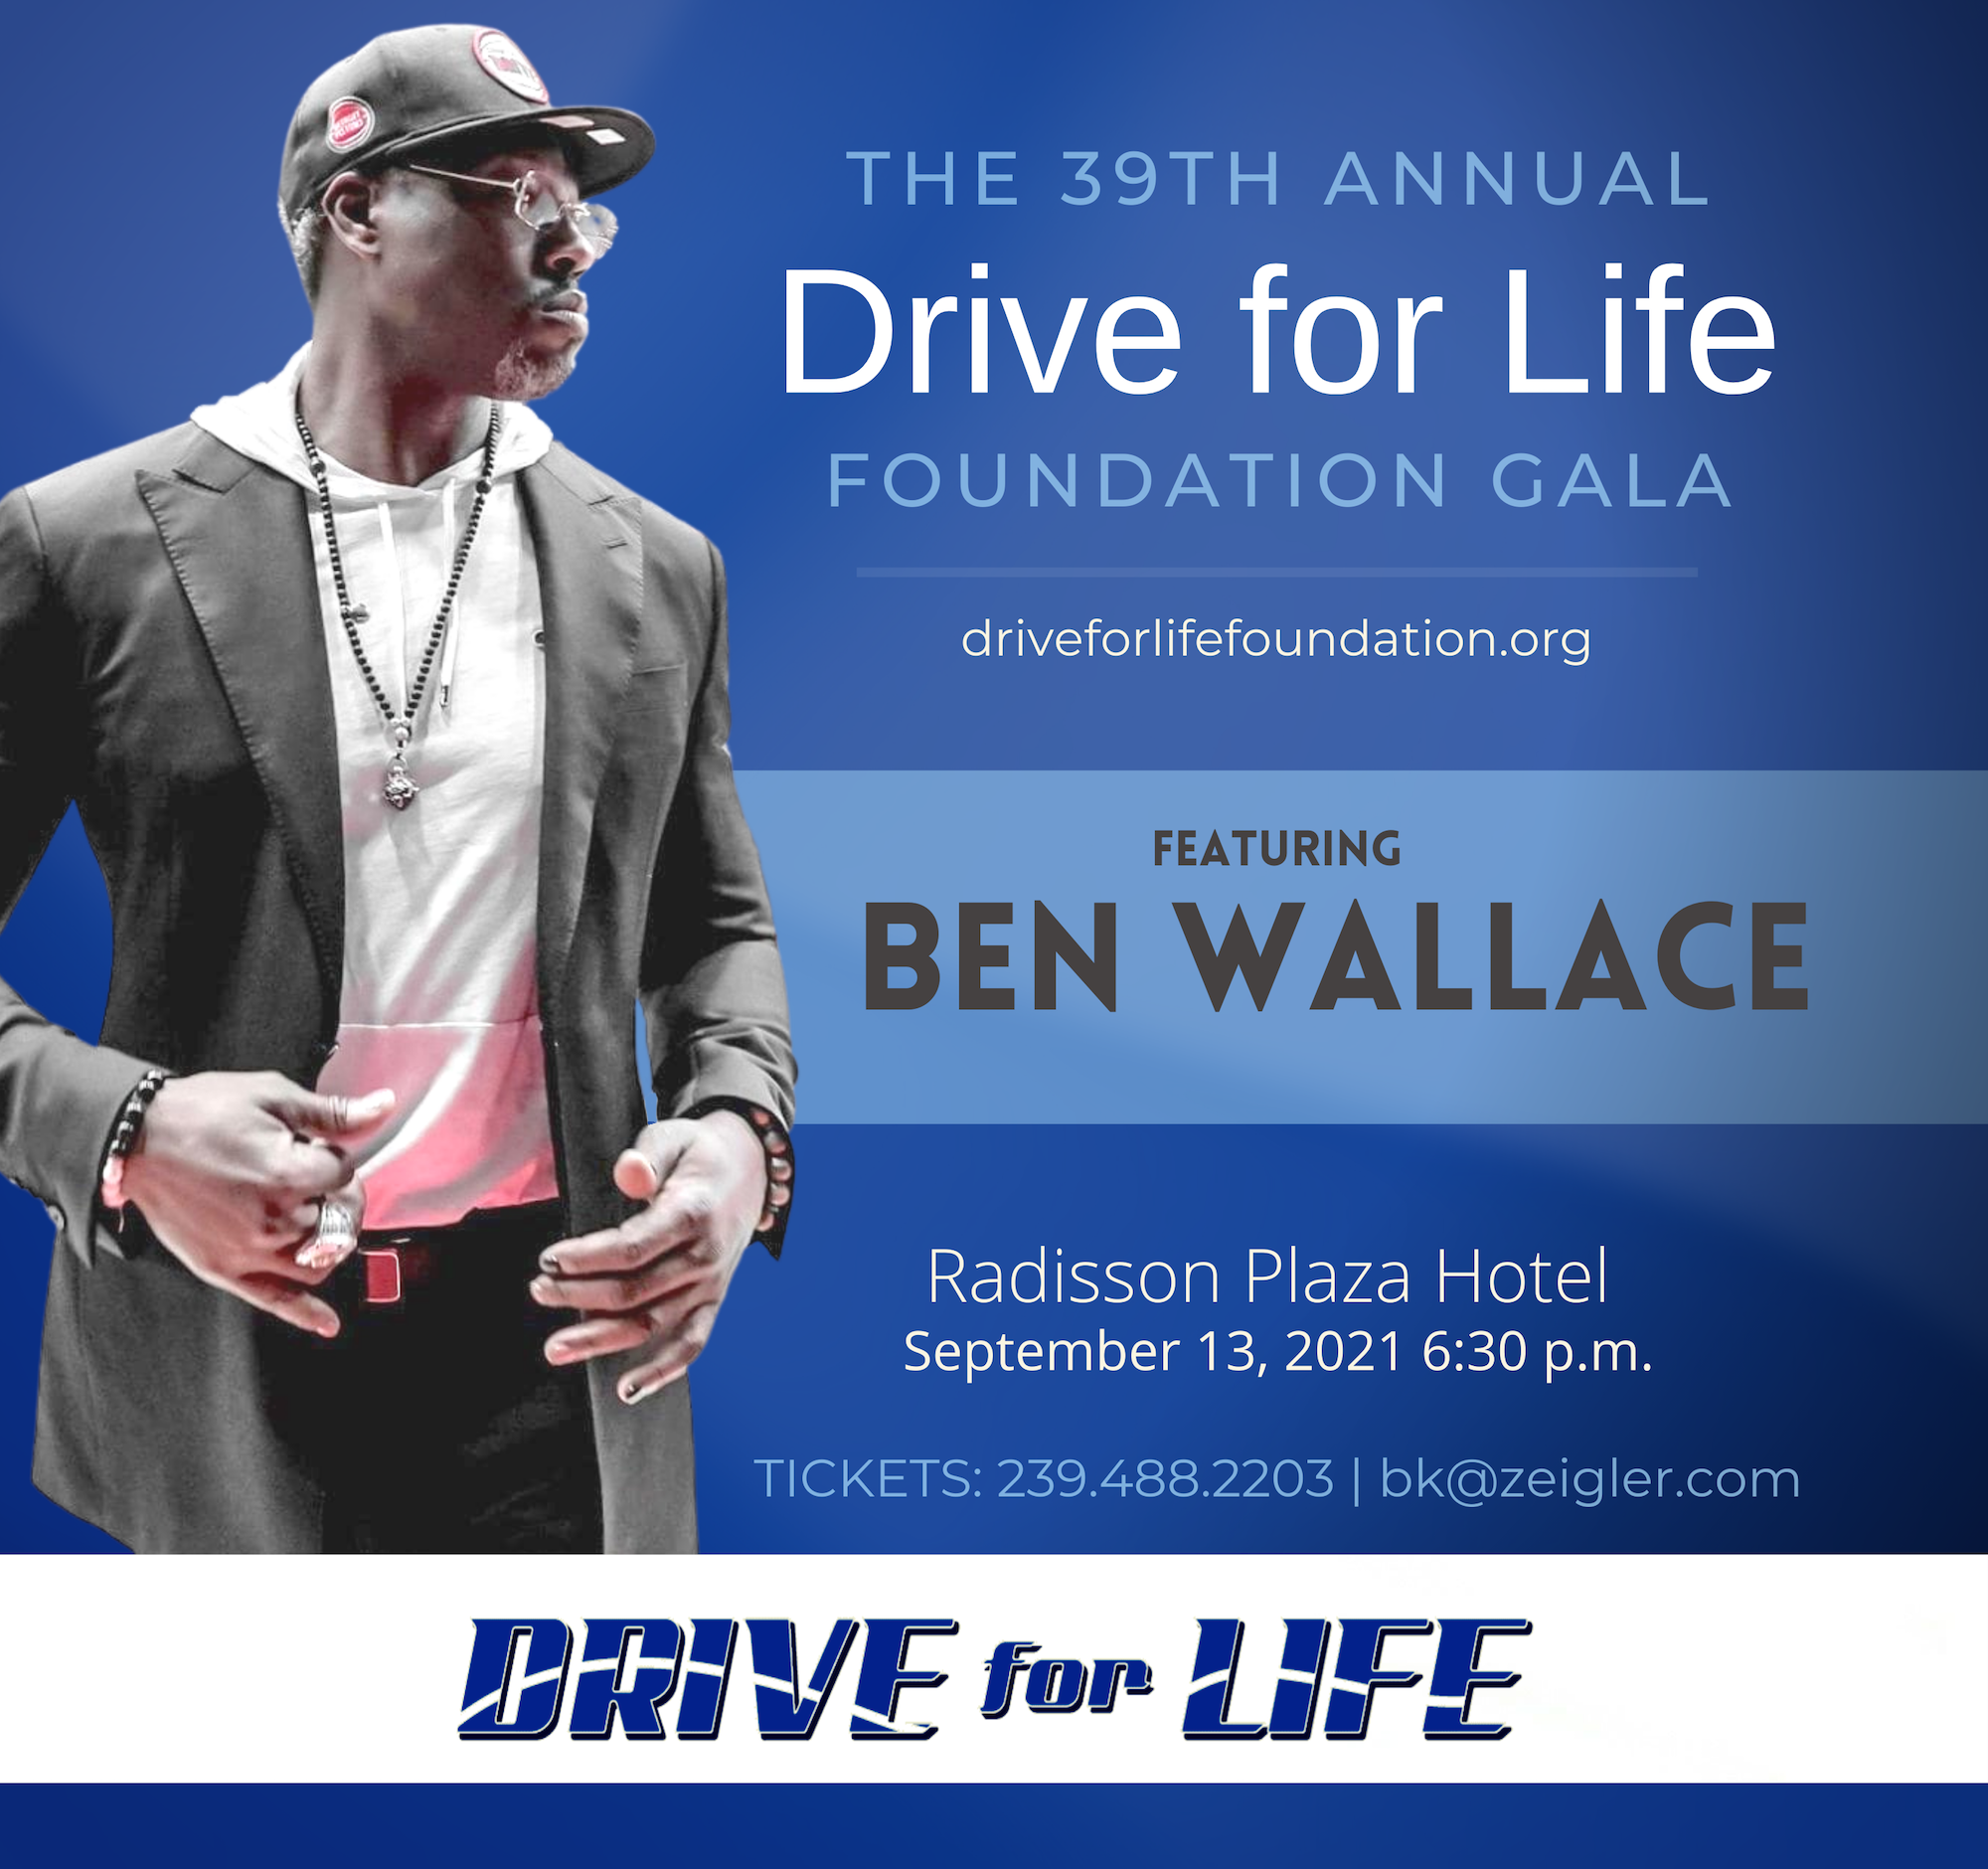 Soon-to-be NBA Hall of Famer Ben Wallace joins the 39th Annual Drive for Life Foundation Gala as a special guest speaker